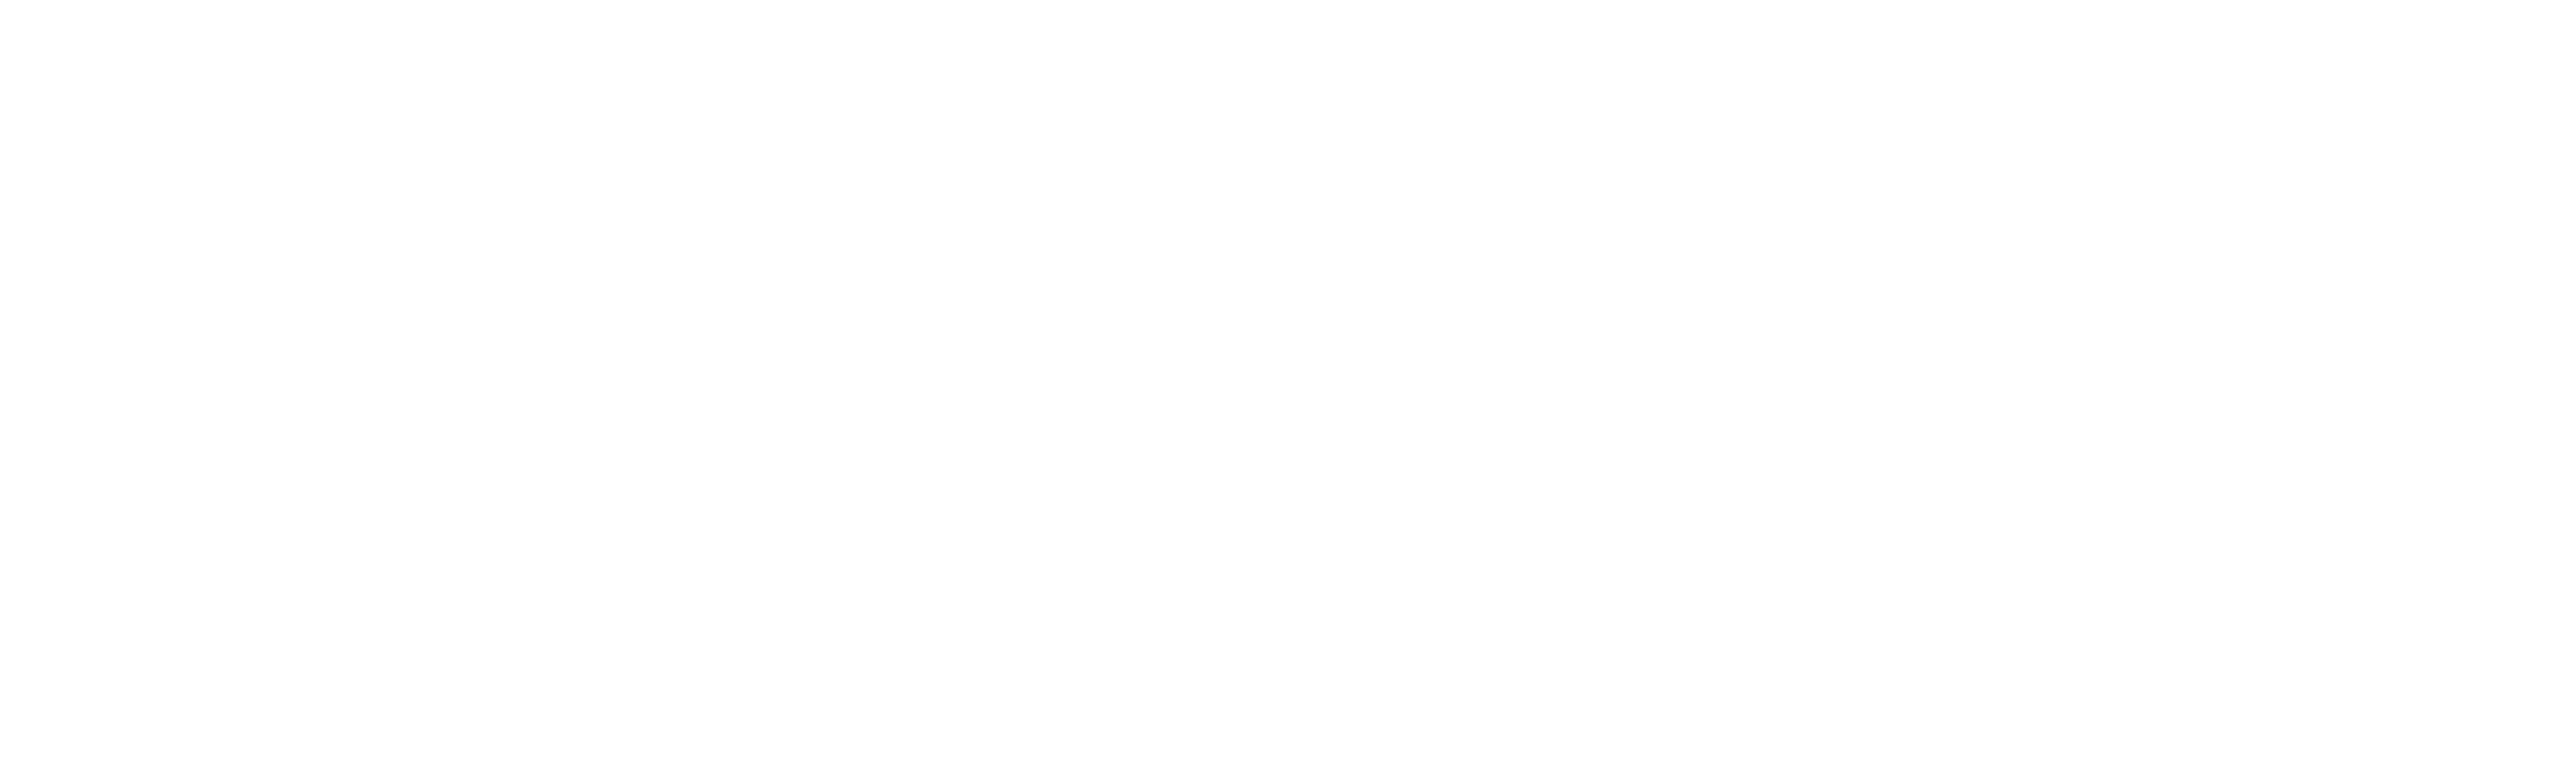 Childrens Rights Service Nottinghamshire logo in white